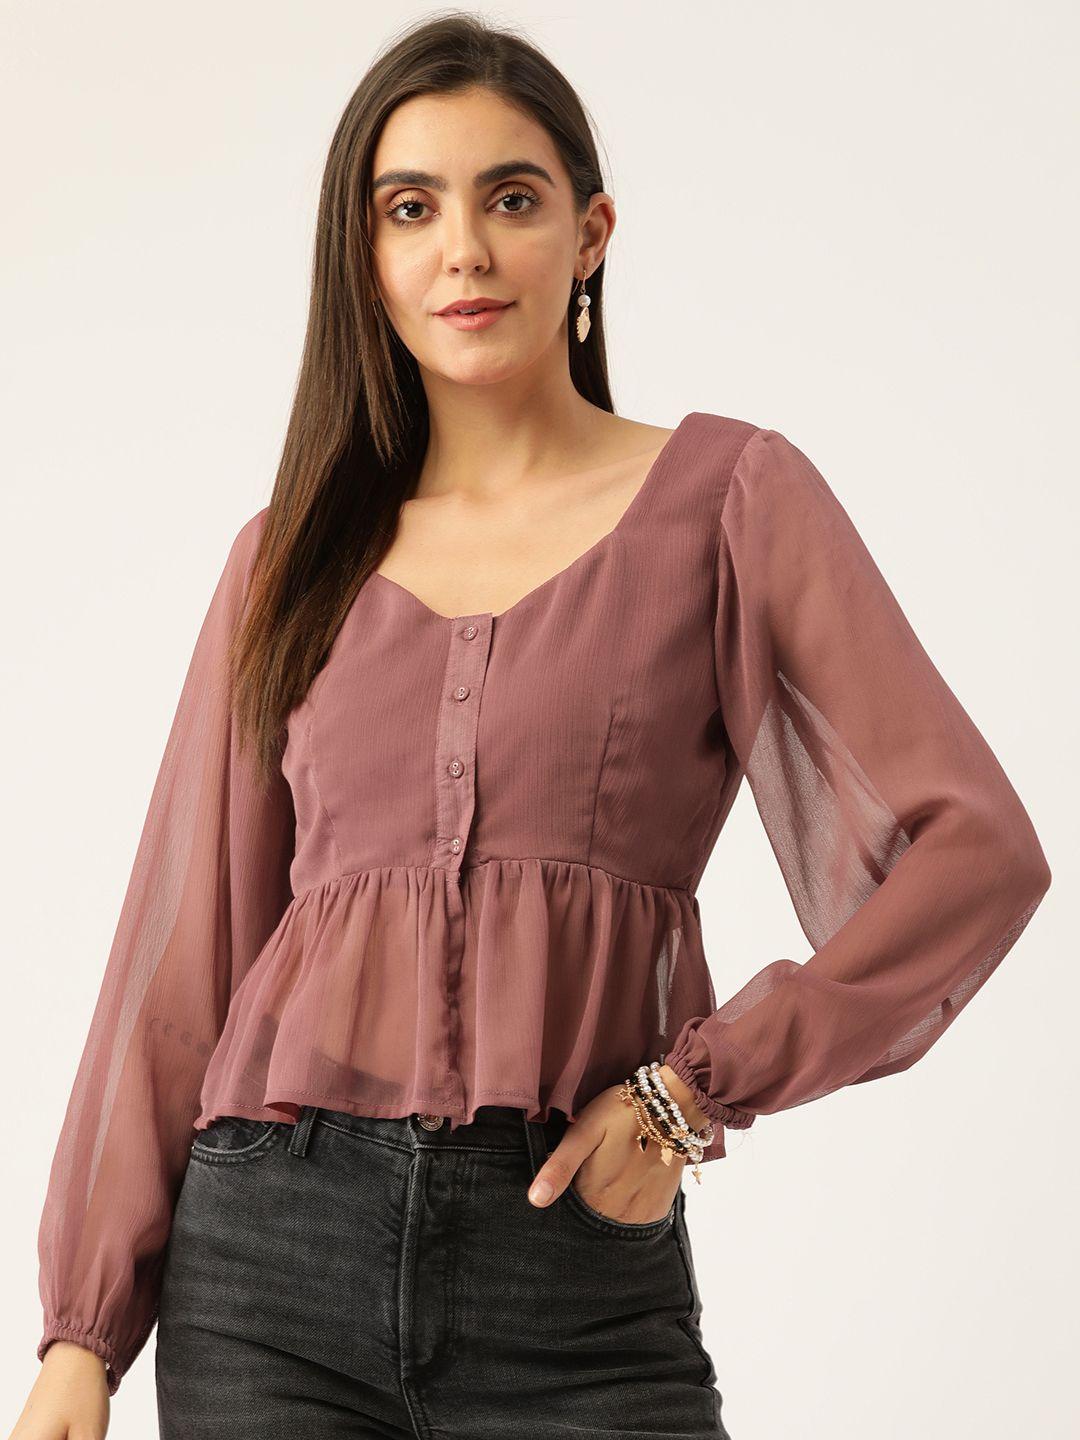 rue collection mauve solid semi sheer peplum top